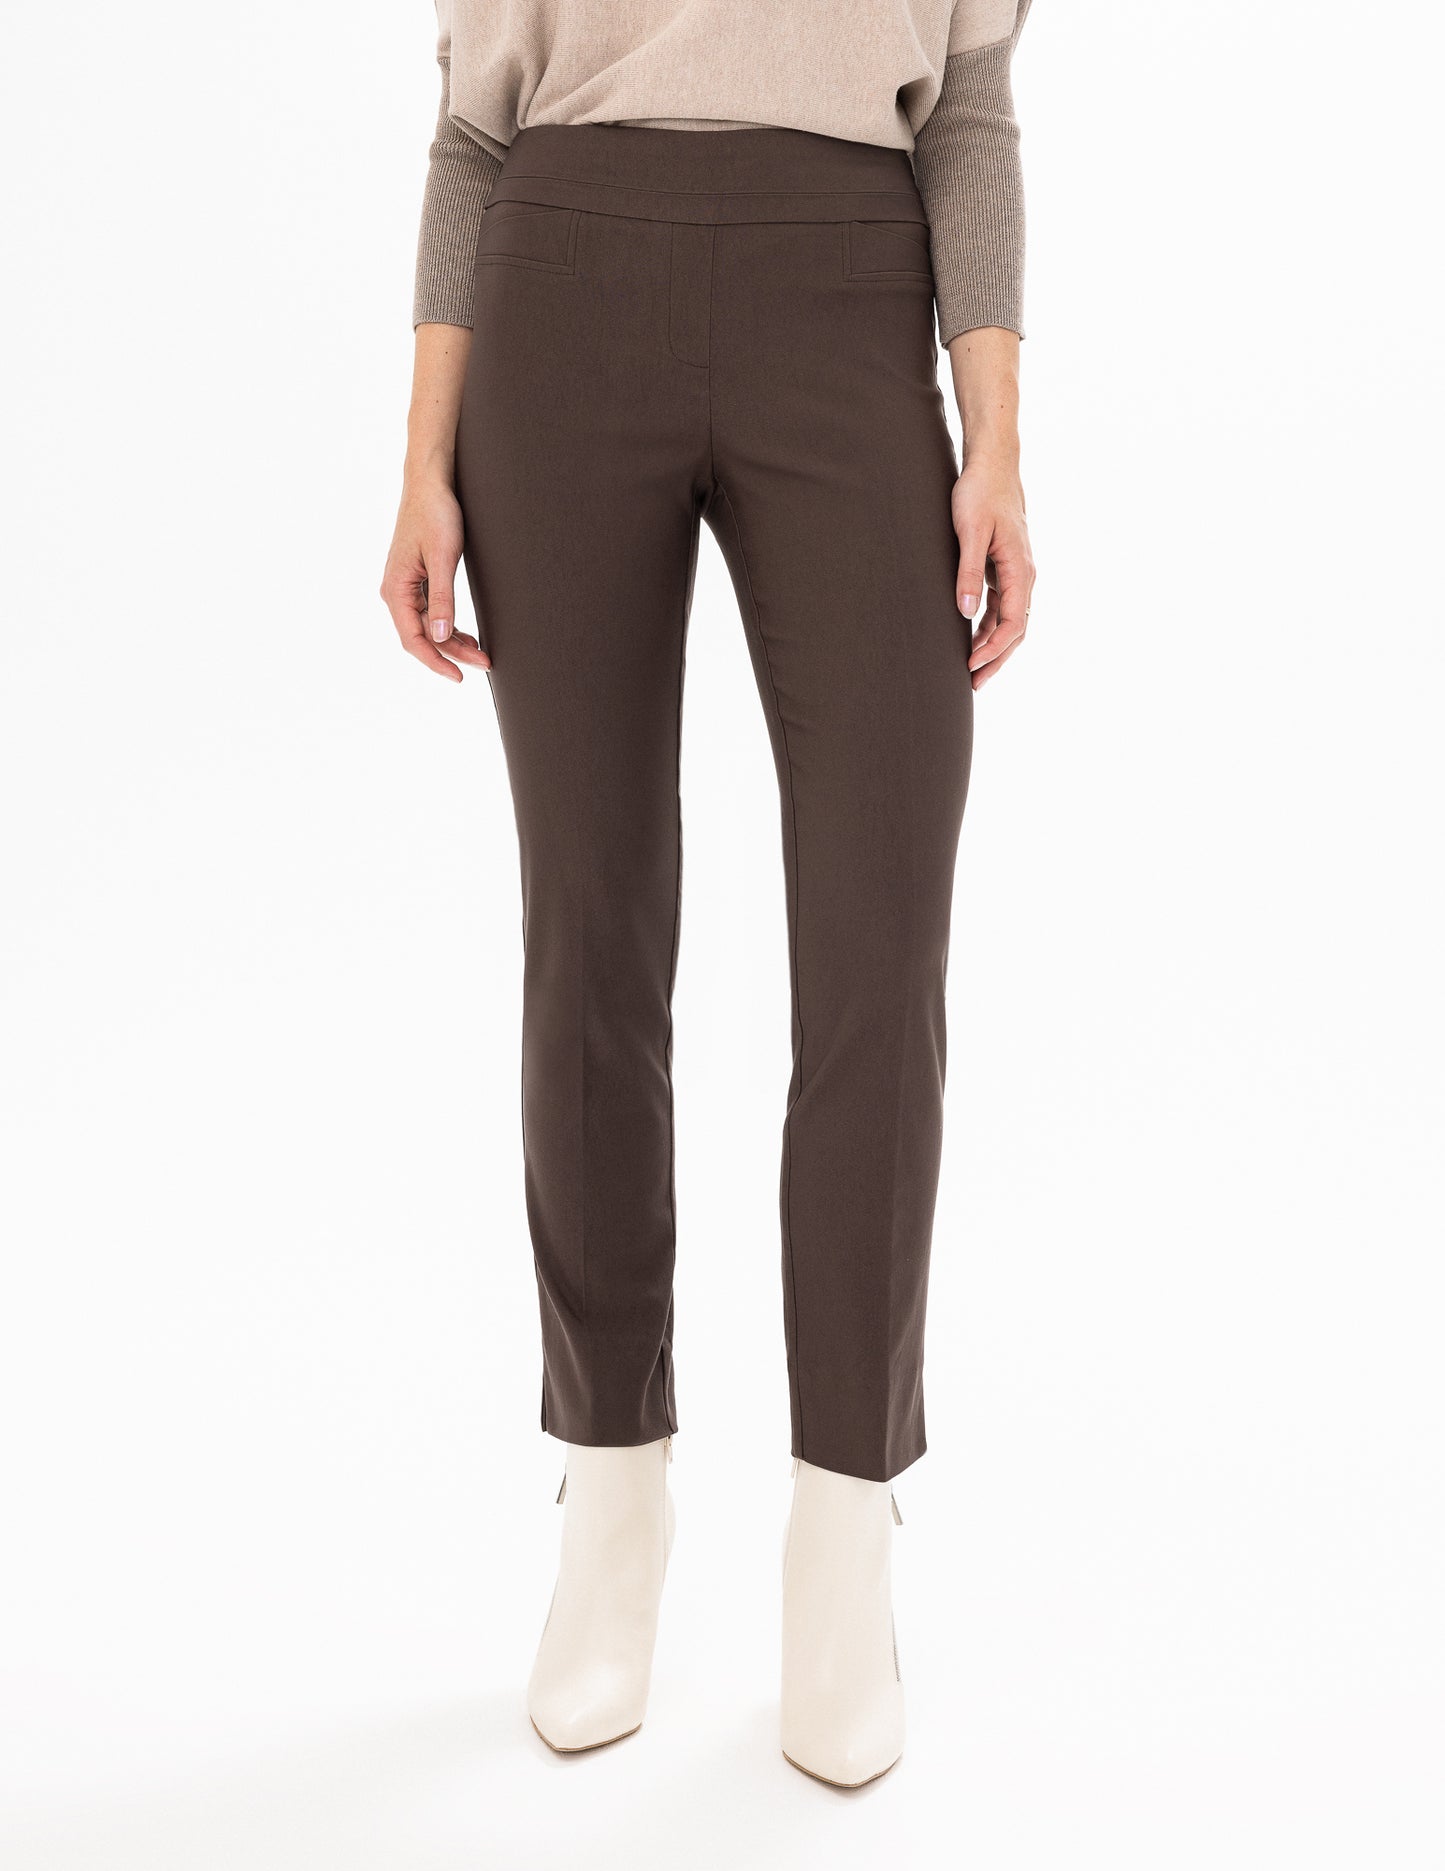 Renuar Chocolate Woven Ankle Pant